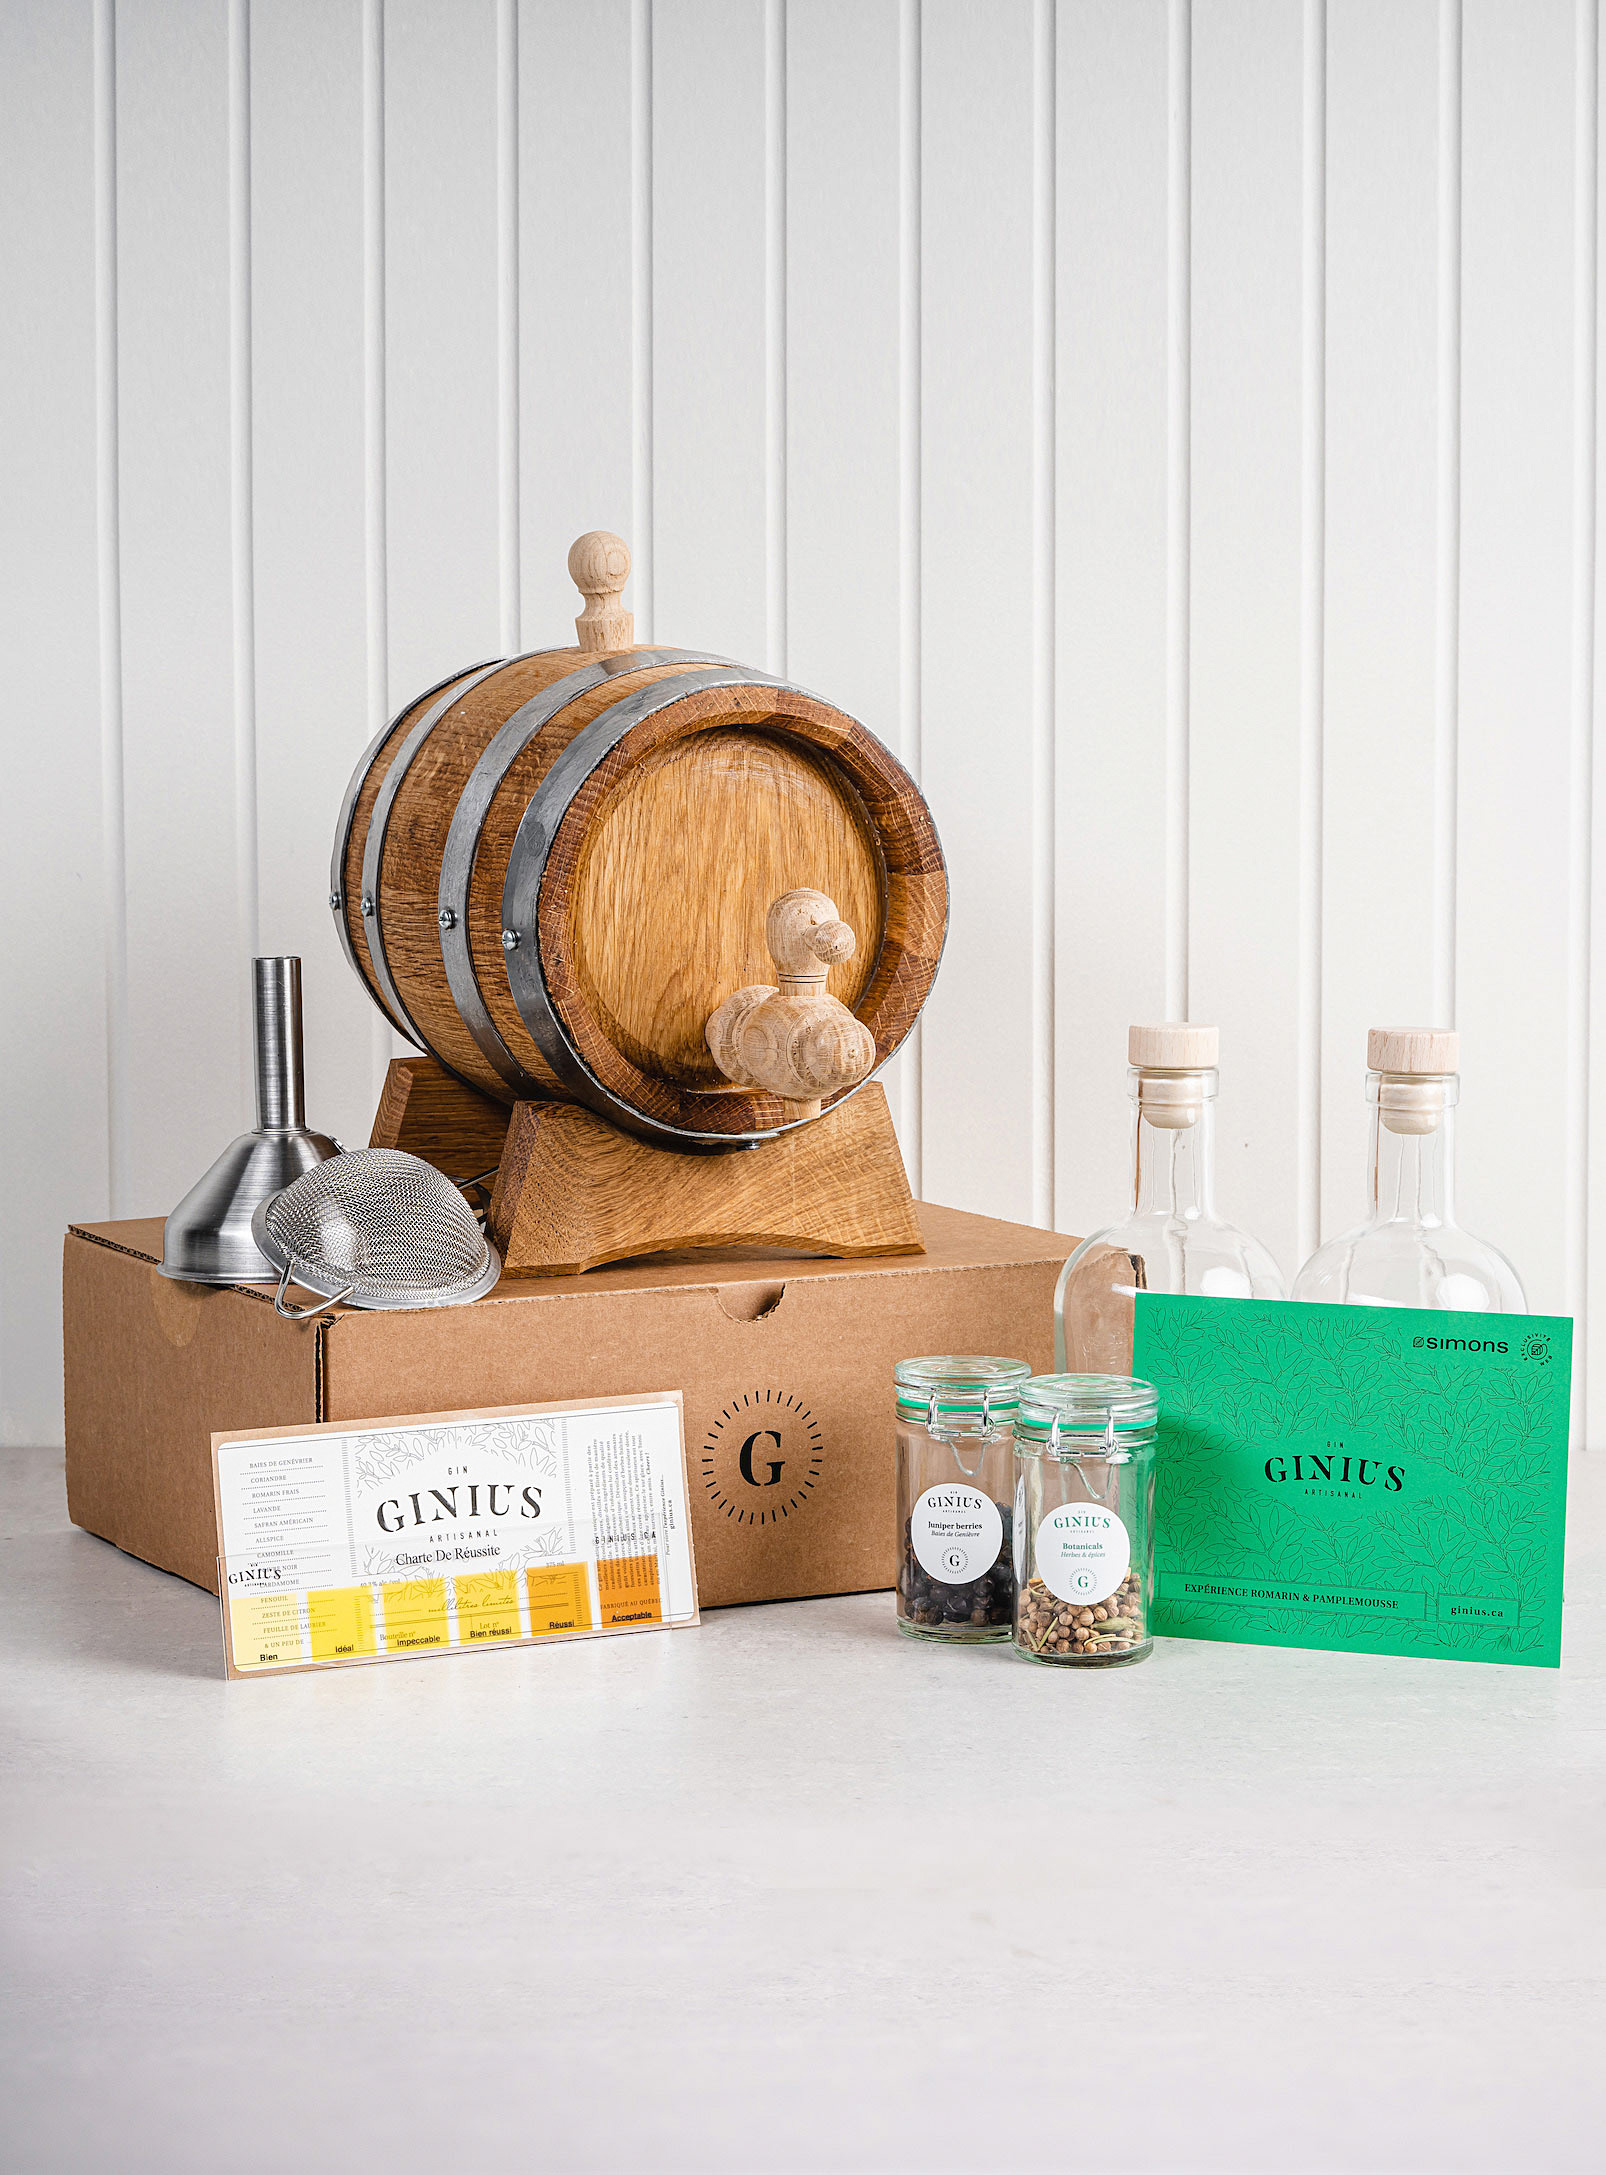 Ginius - Barrel and herb homemade gin kit-Special limited edition